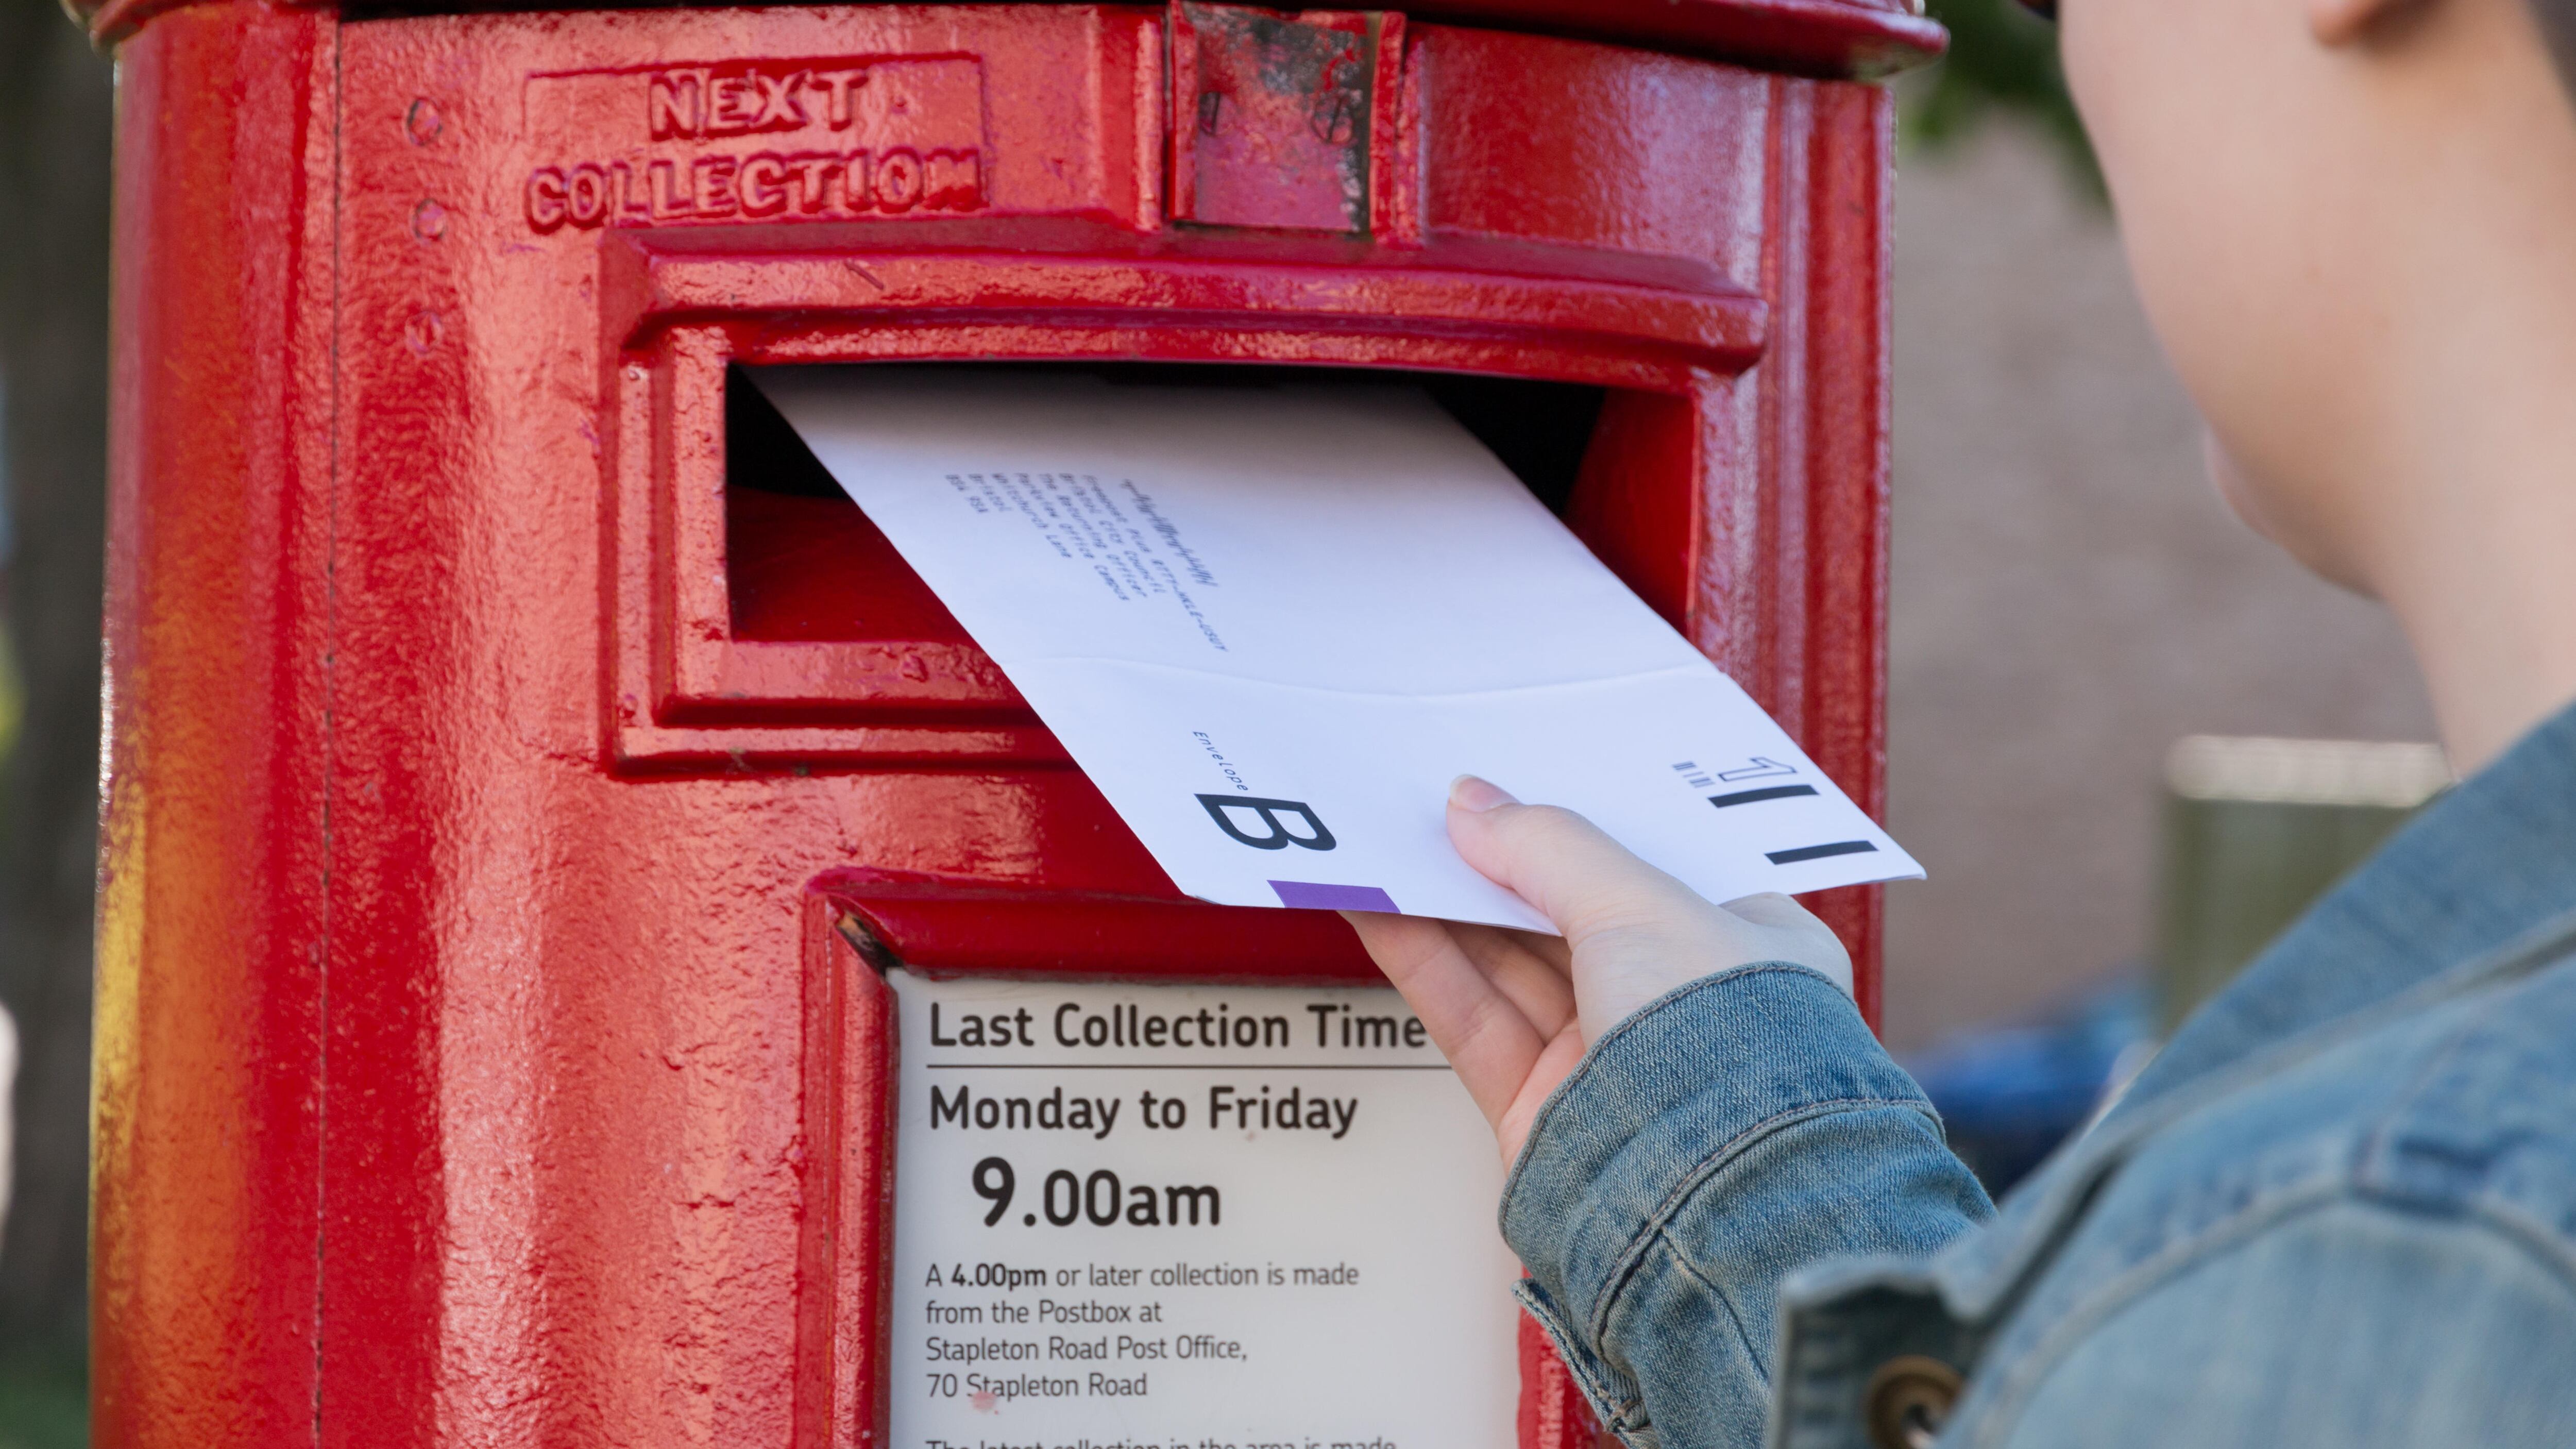 Completed postal votes must have reached councils by 10pm on polling day, July 4